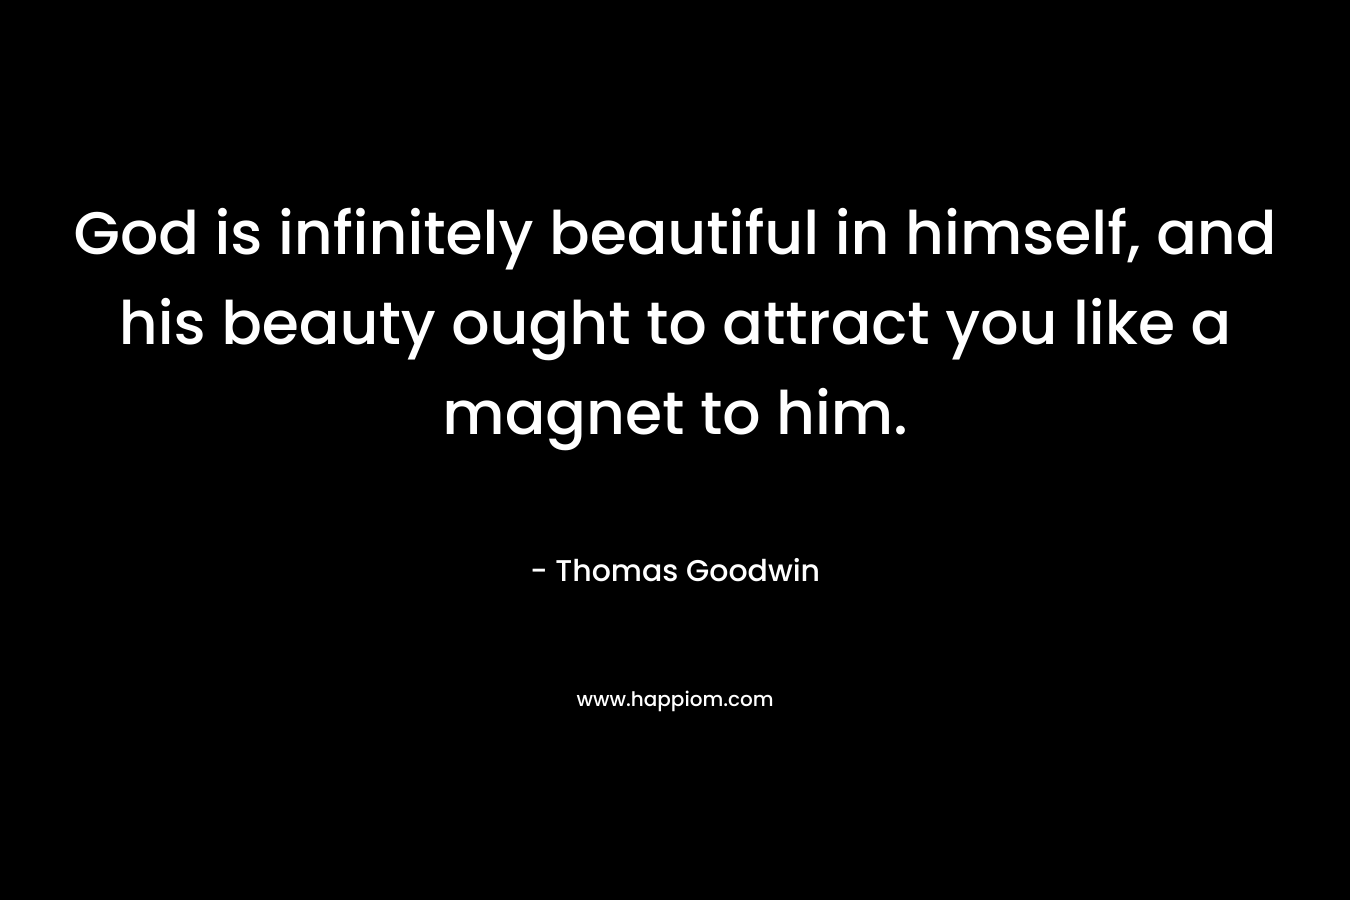 God is infinitely beautiful in himself, and his beauty ought to attract you like a magnet to him. – Thomas Goodwin